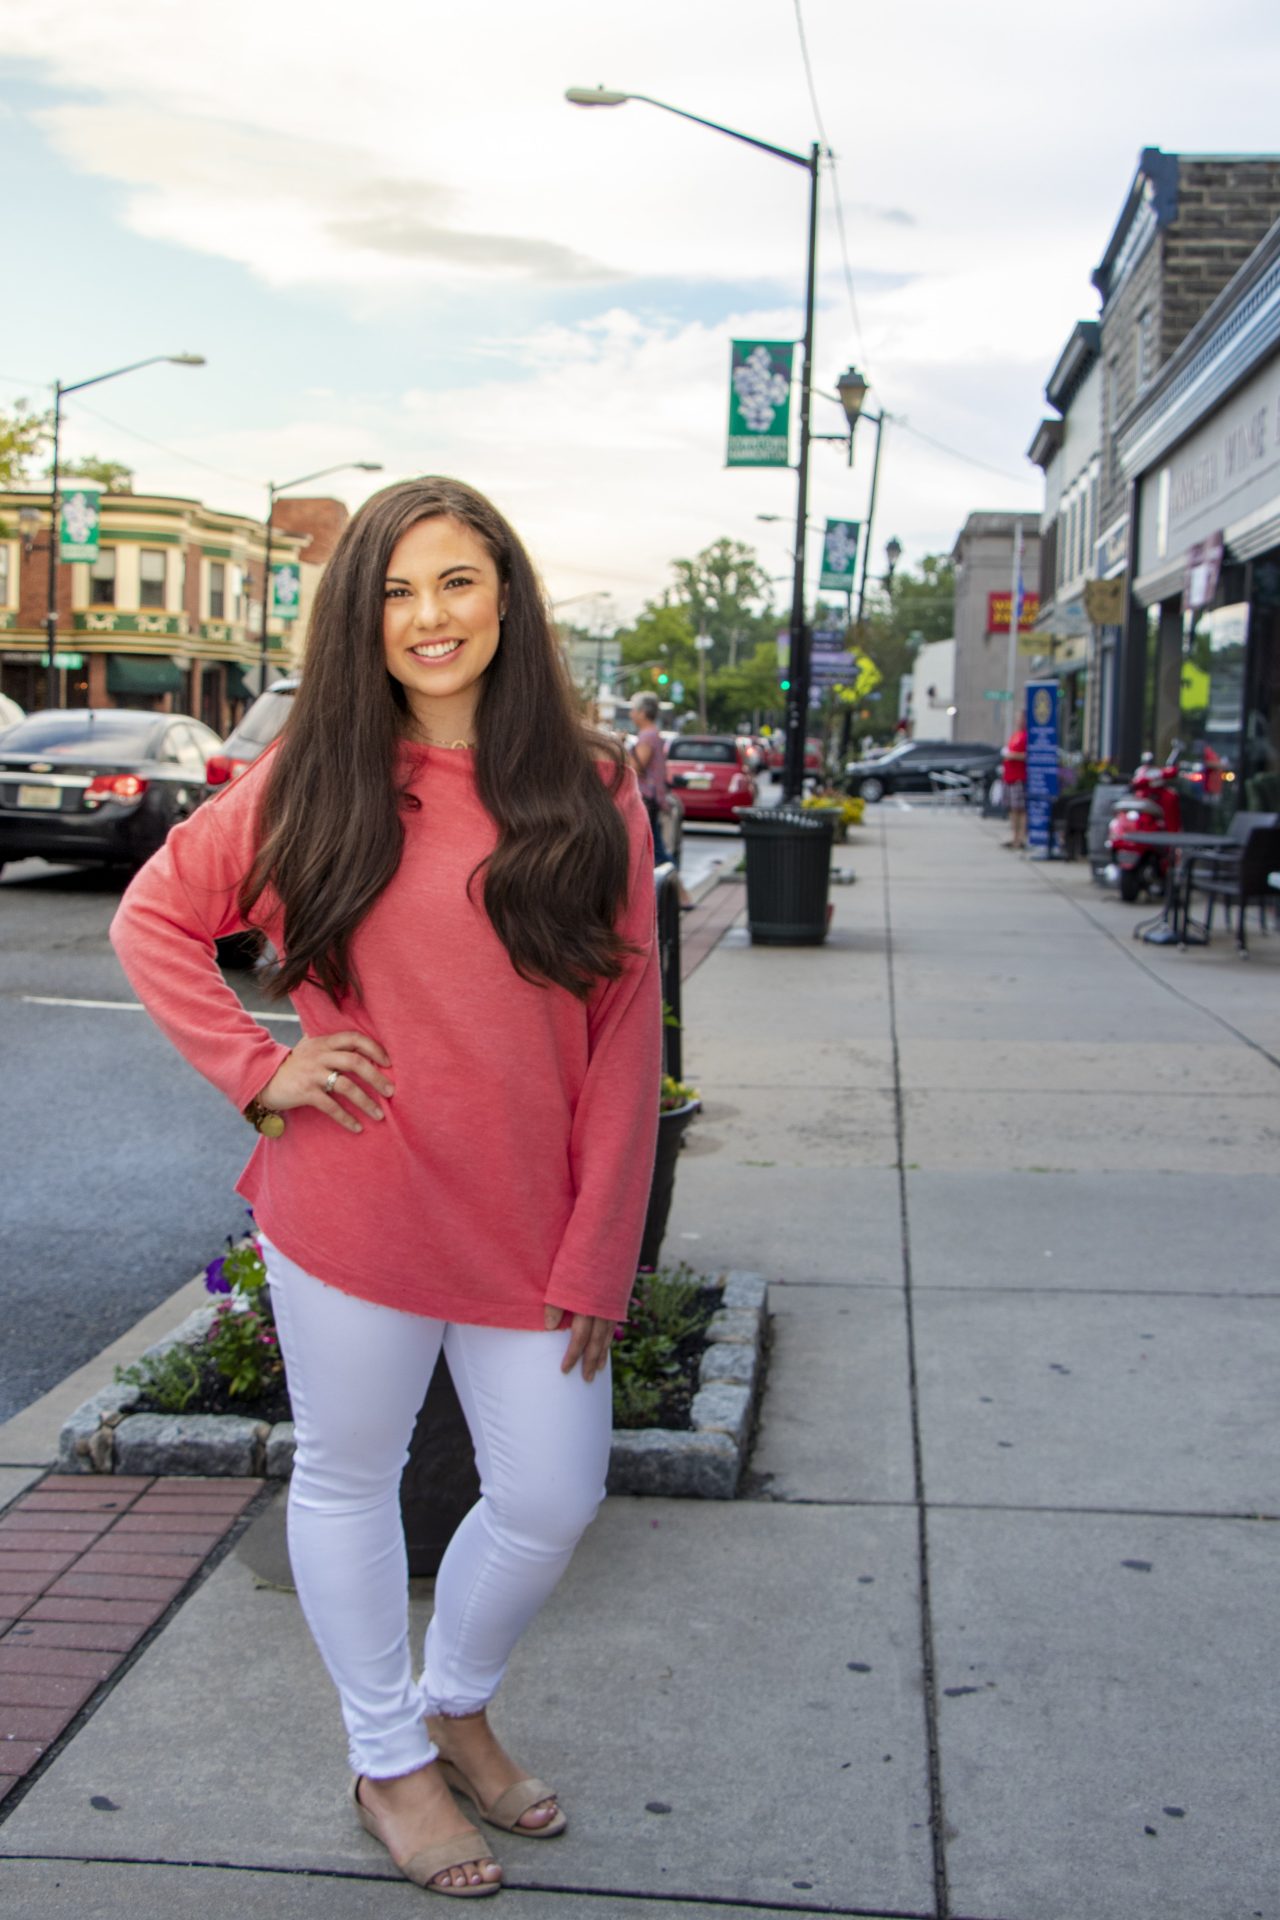 A woman in a pink top and white pants with her hand on her hip posing on a busy town street sidewalk